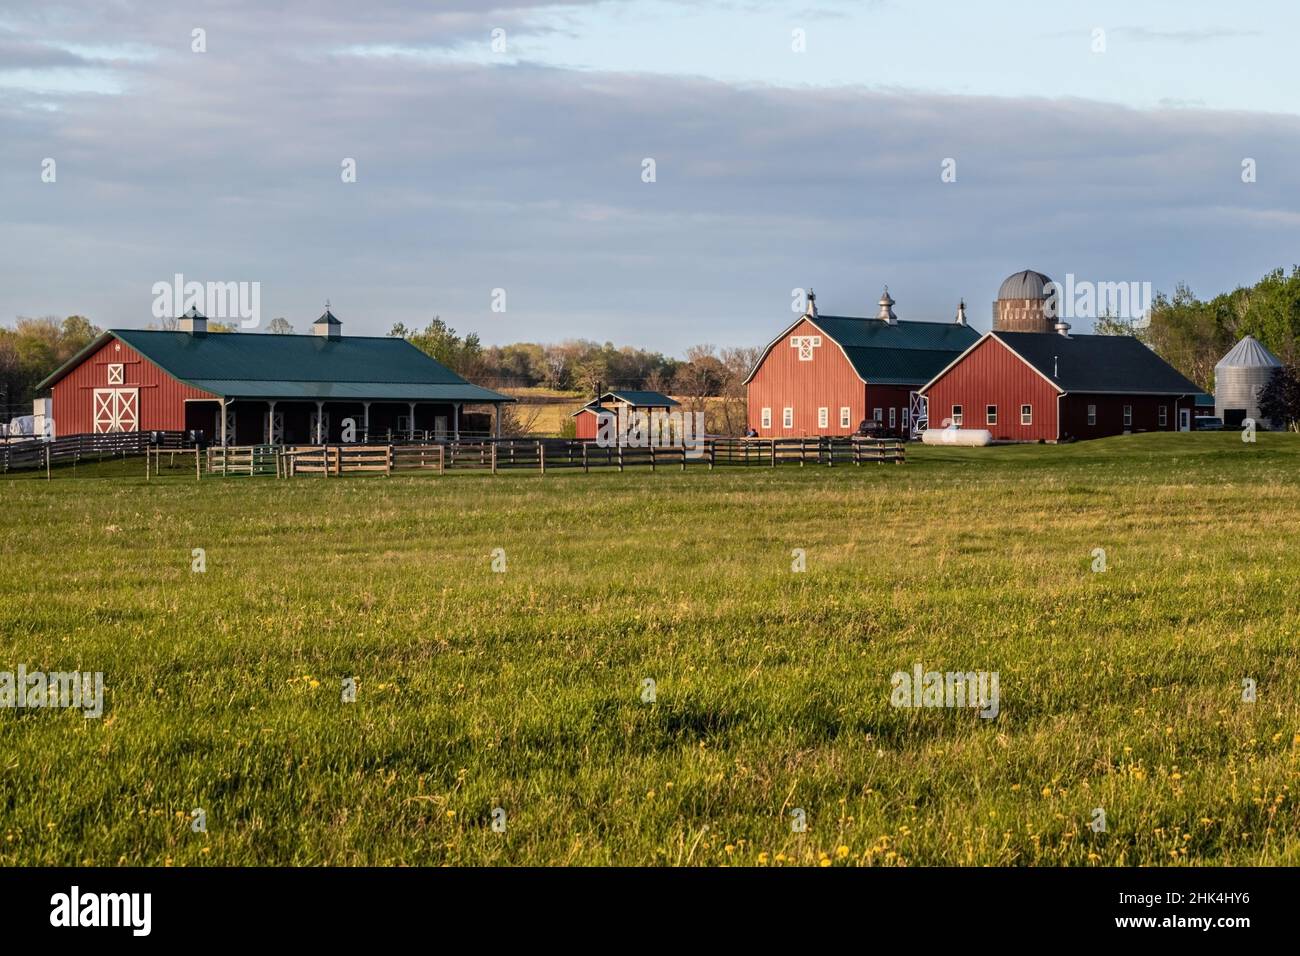 Red barns and silos with fencing taken across a grassy meadow as the sun was getting low in the sky. Stock Photo